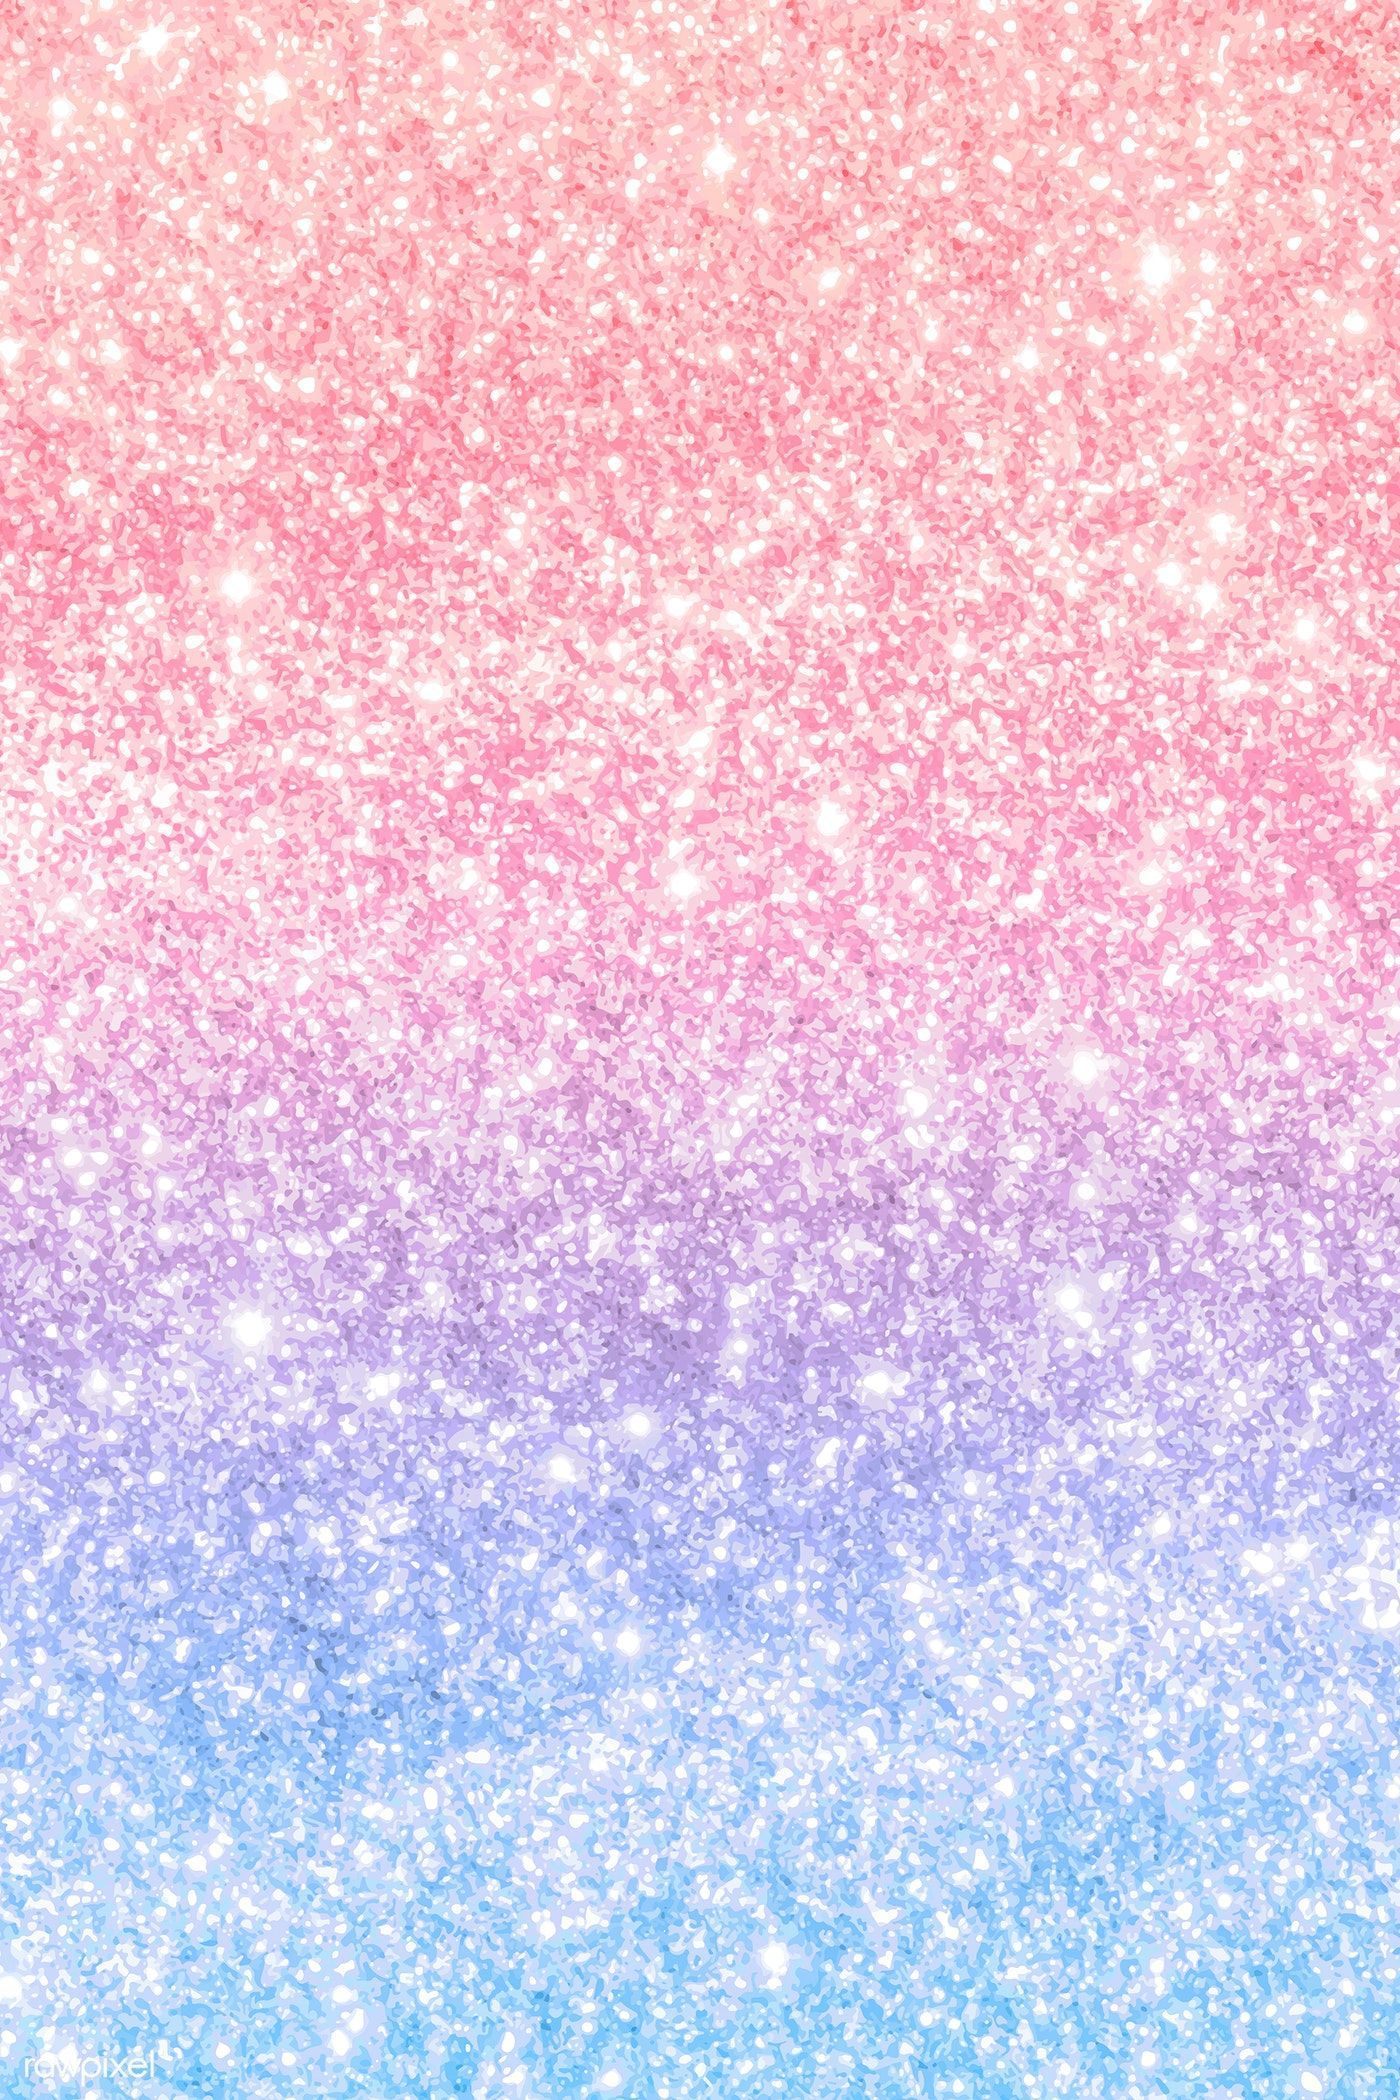 Pink and Blue Glitter Wallpaper Free Pink and Blue Glitter Background